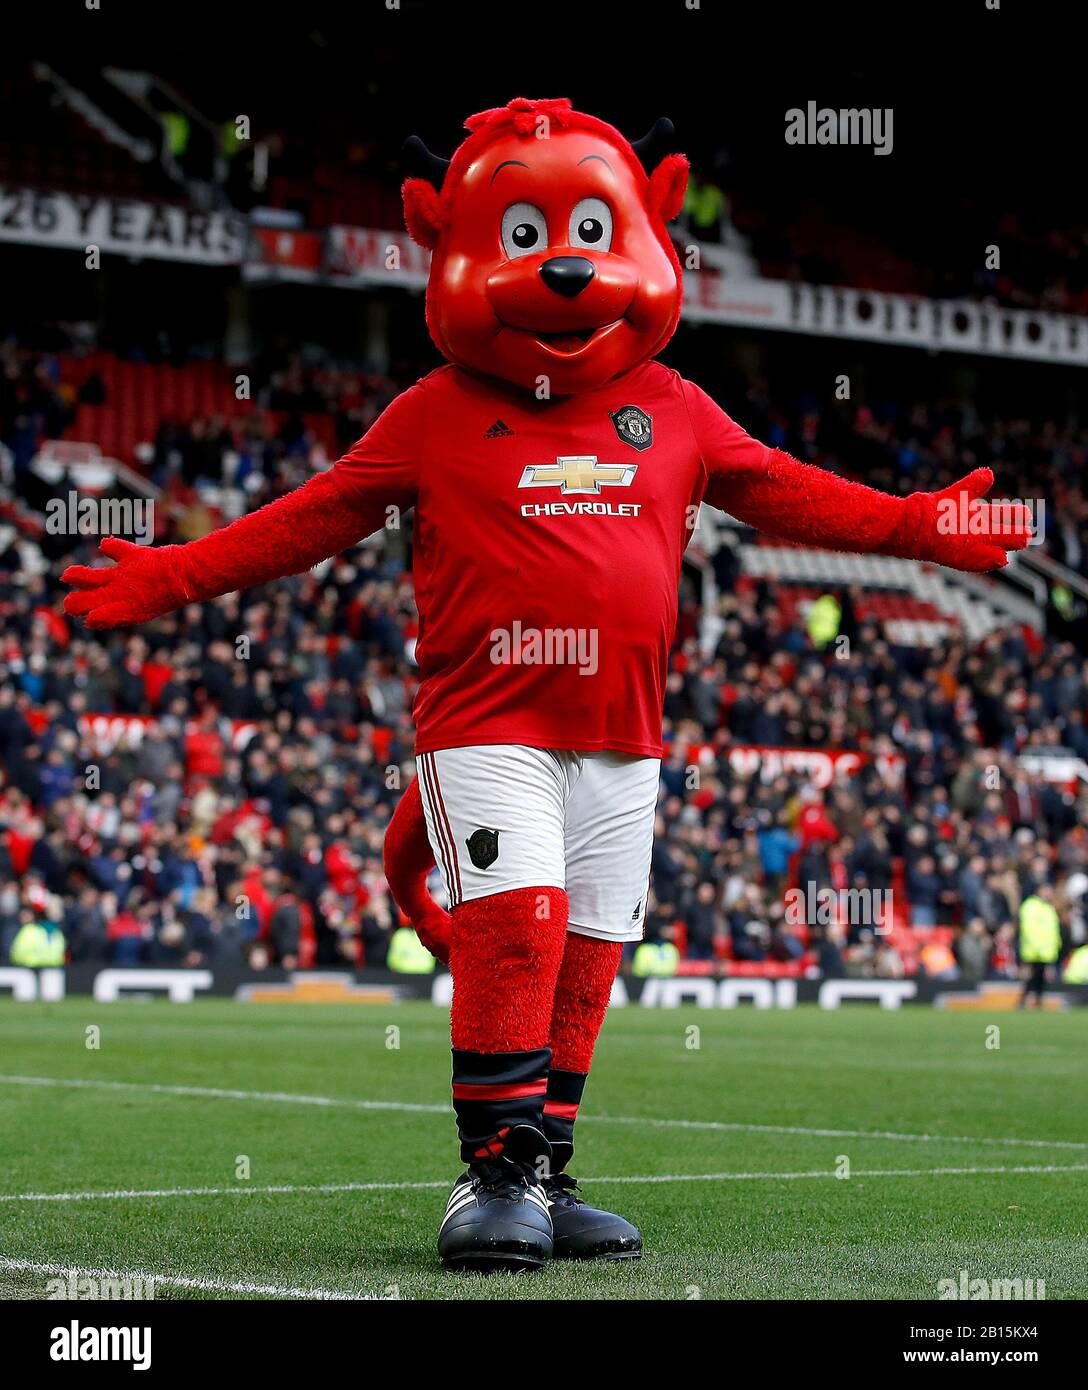 Manchester United mascot Fred the Red half-time during Premier League match at Old Trafford, Manchester Stock Photo Alamy